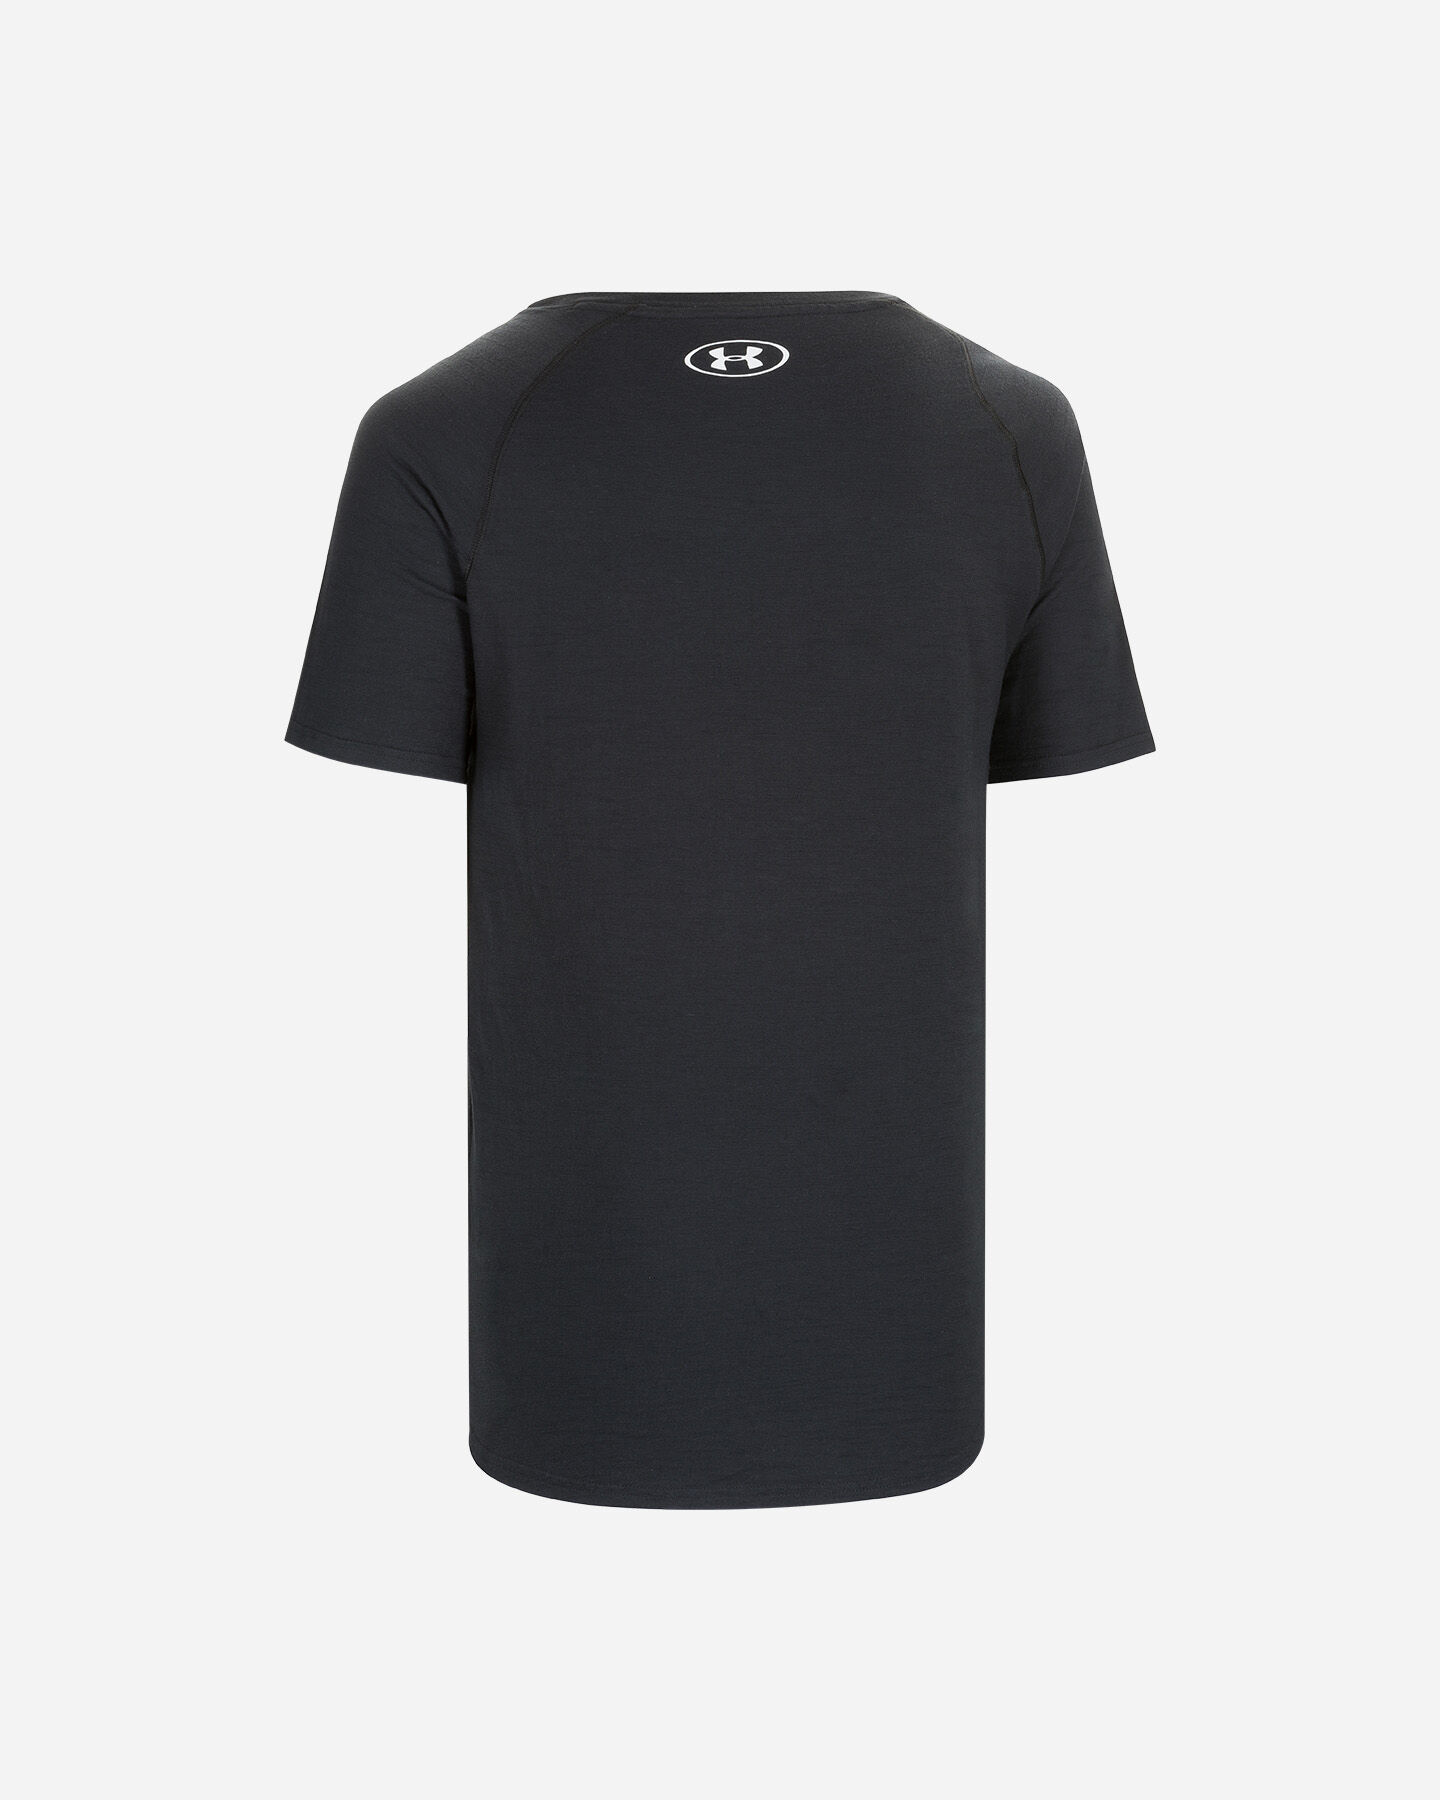  T-Shirt training UNDER ARMOUR CHARGED M S5169035|0001|SM scatto 1